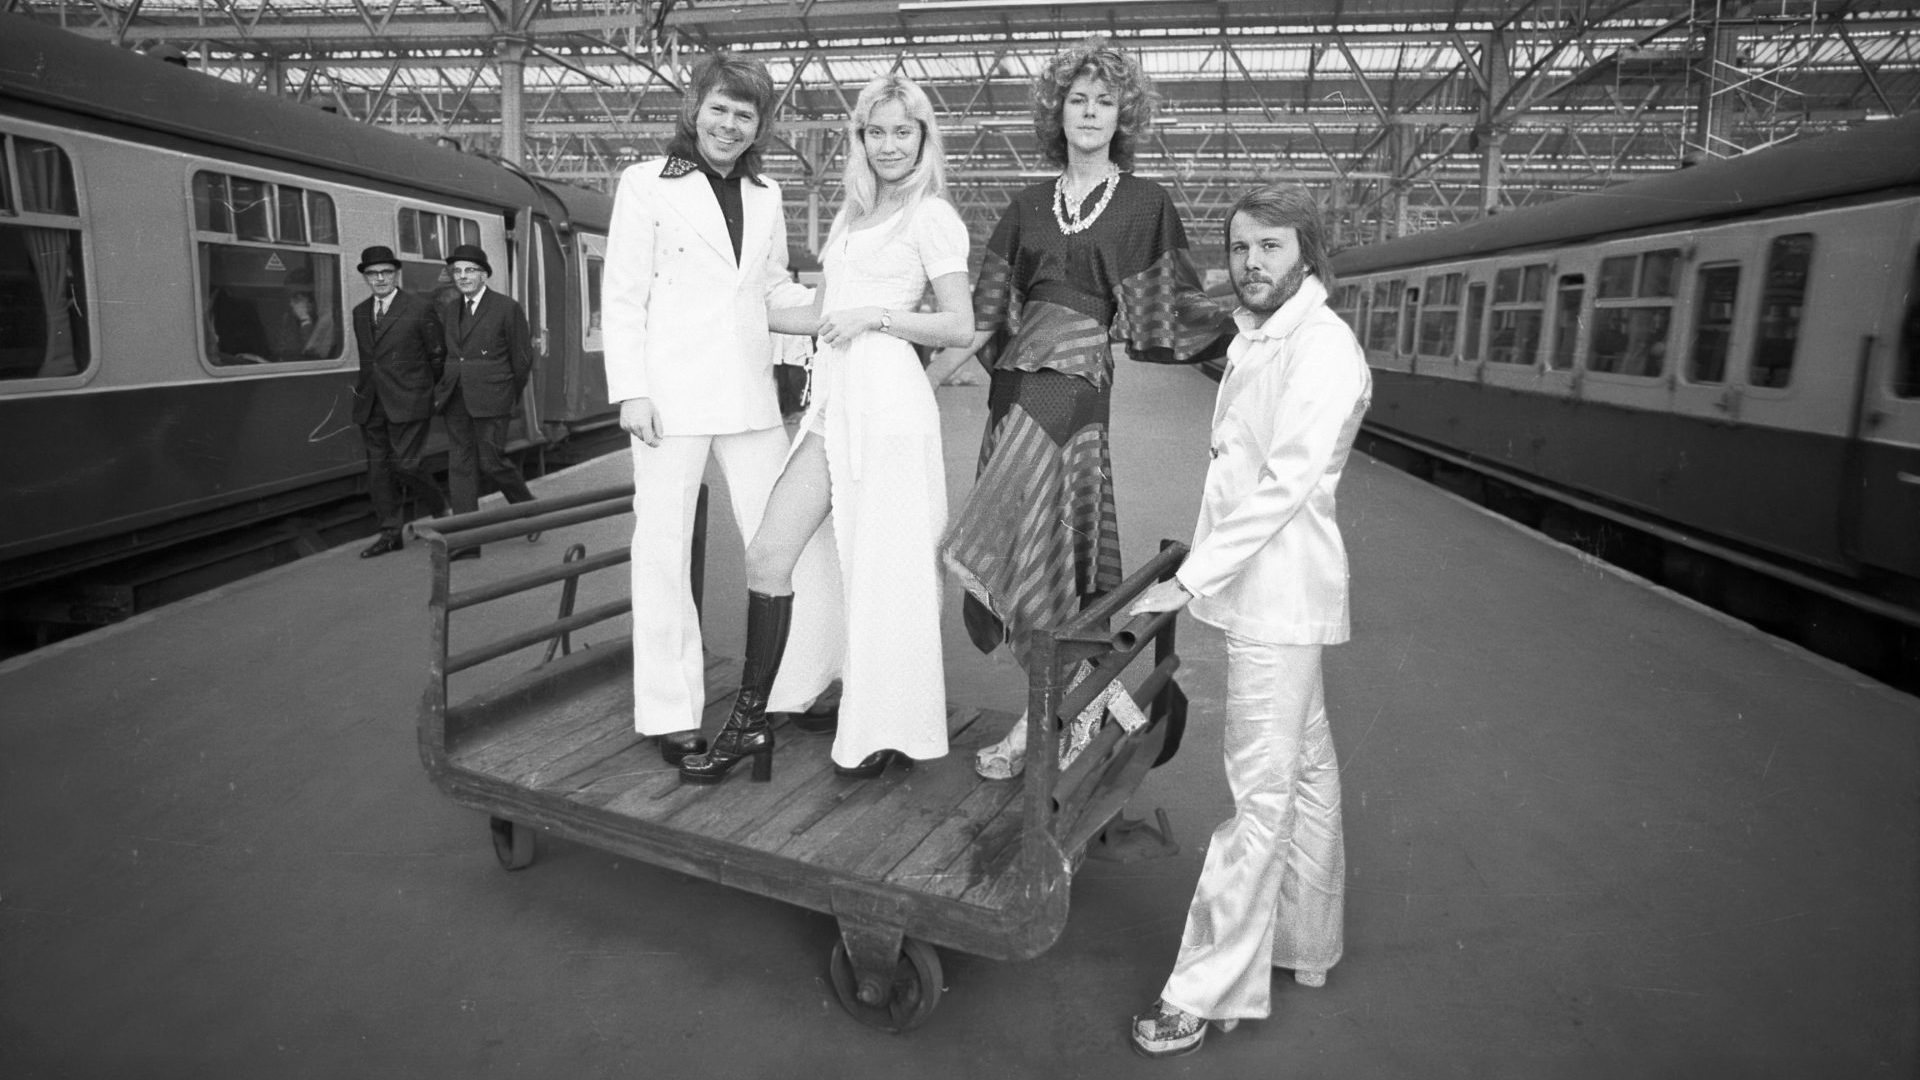 Björn Ulvaeus, Agnetha Fältskog, Anni-Frid Lyngstad and Benny Andersson at Waterloo Station in London after their Eurovision victory, April 1974.  Photo: John Downing/Express